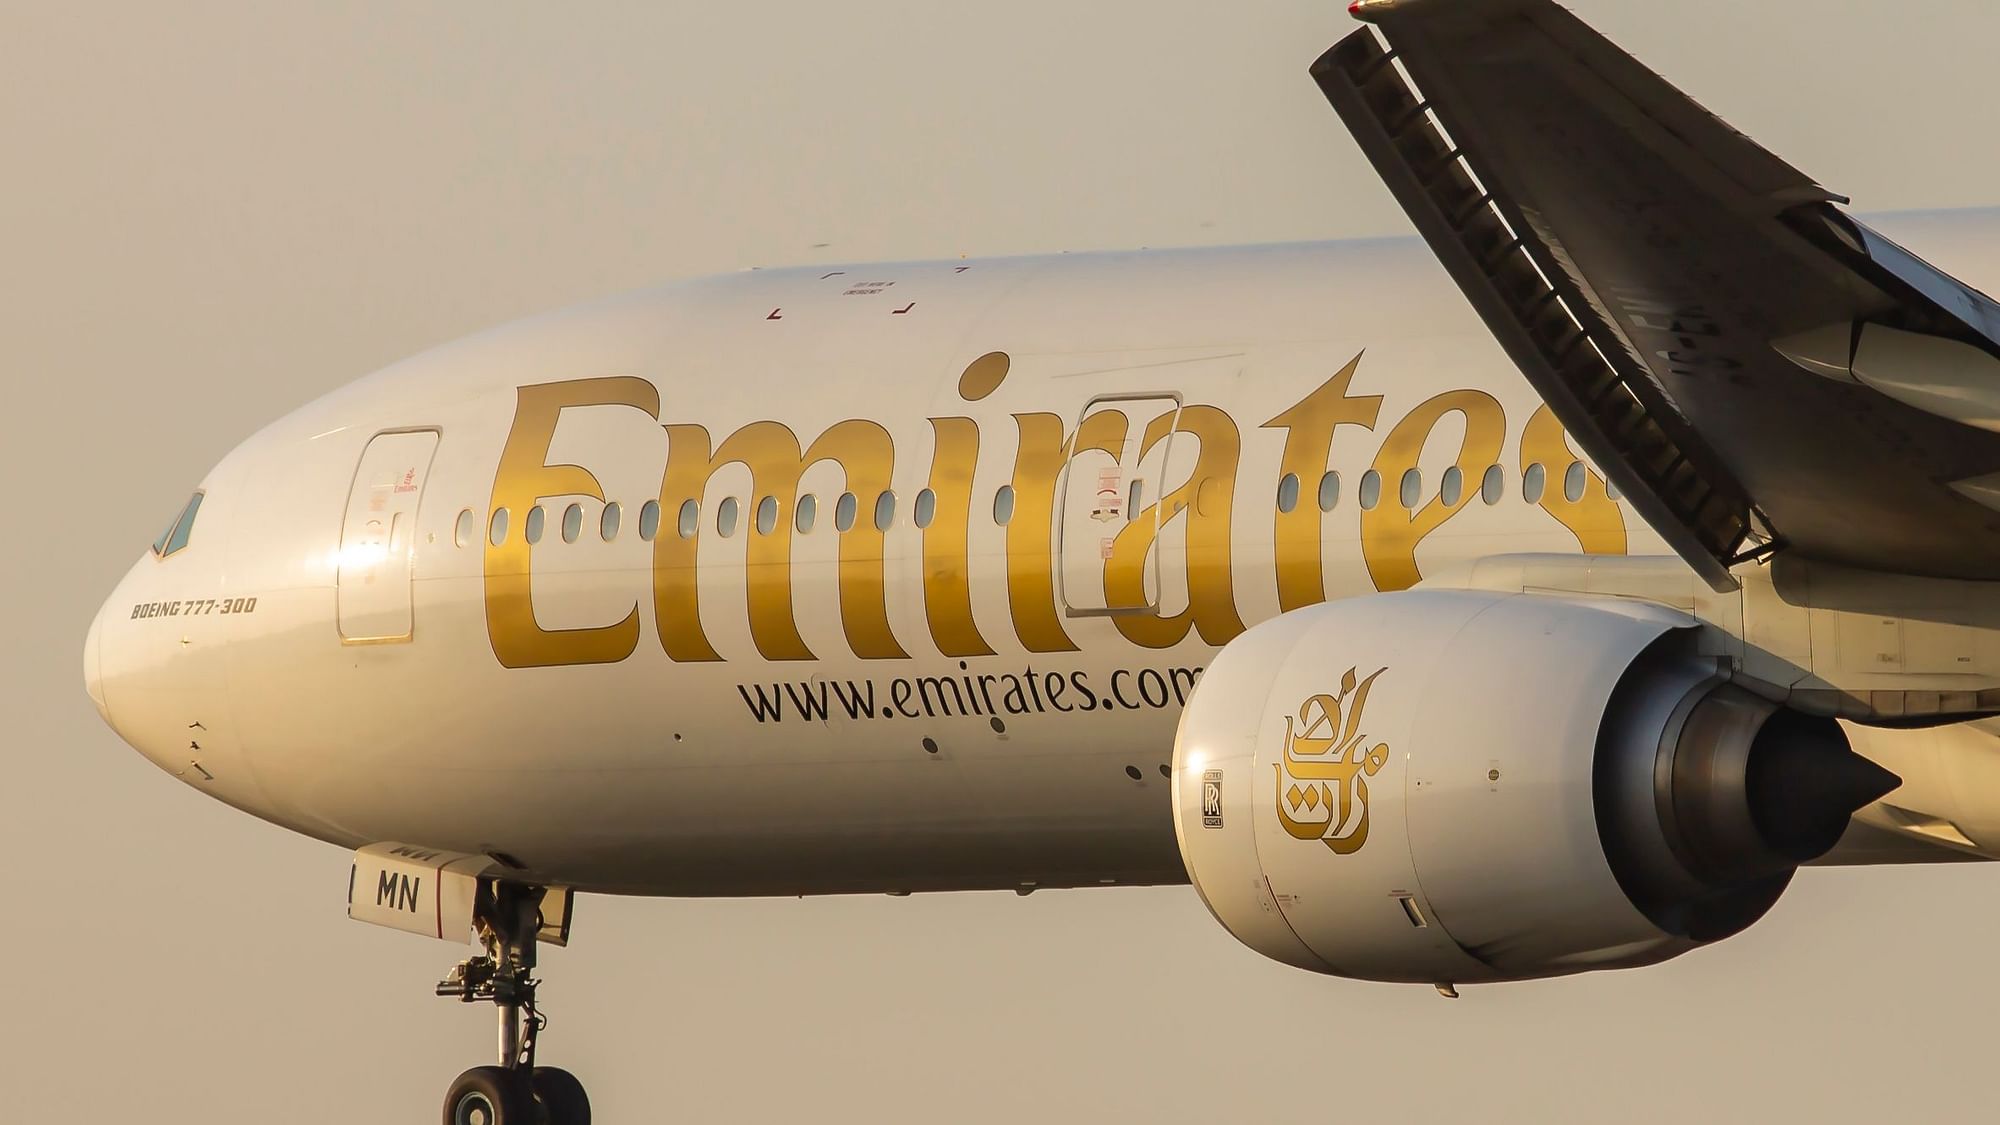 File photo of an Emirates Airlines’s aircraft